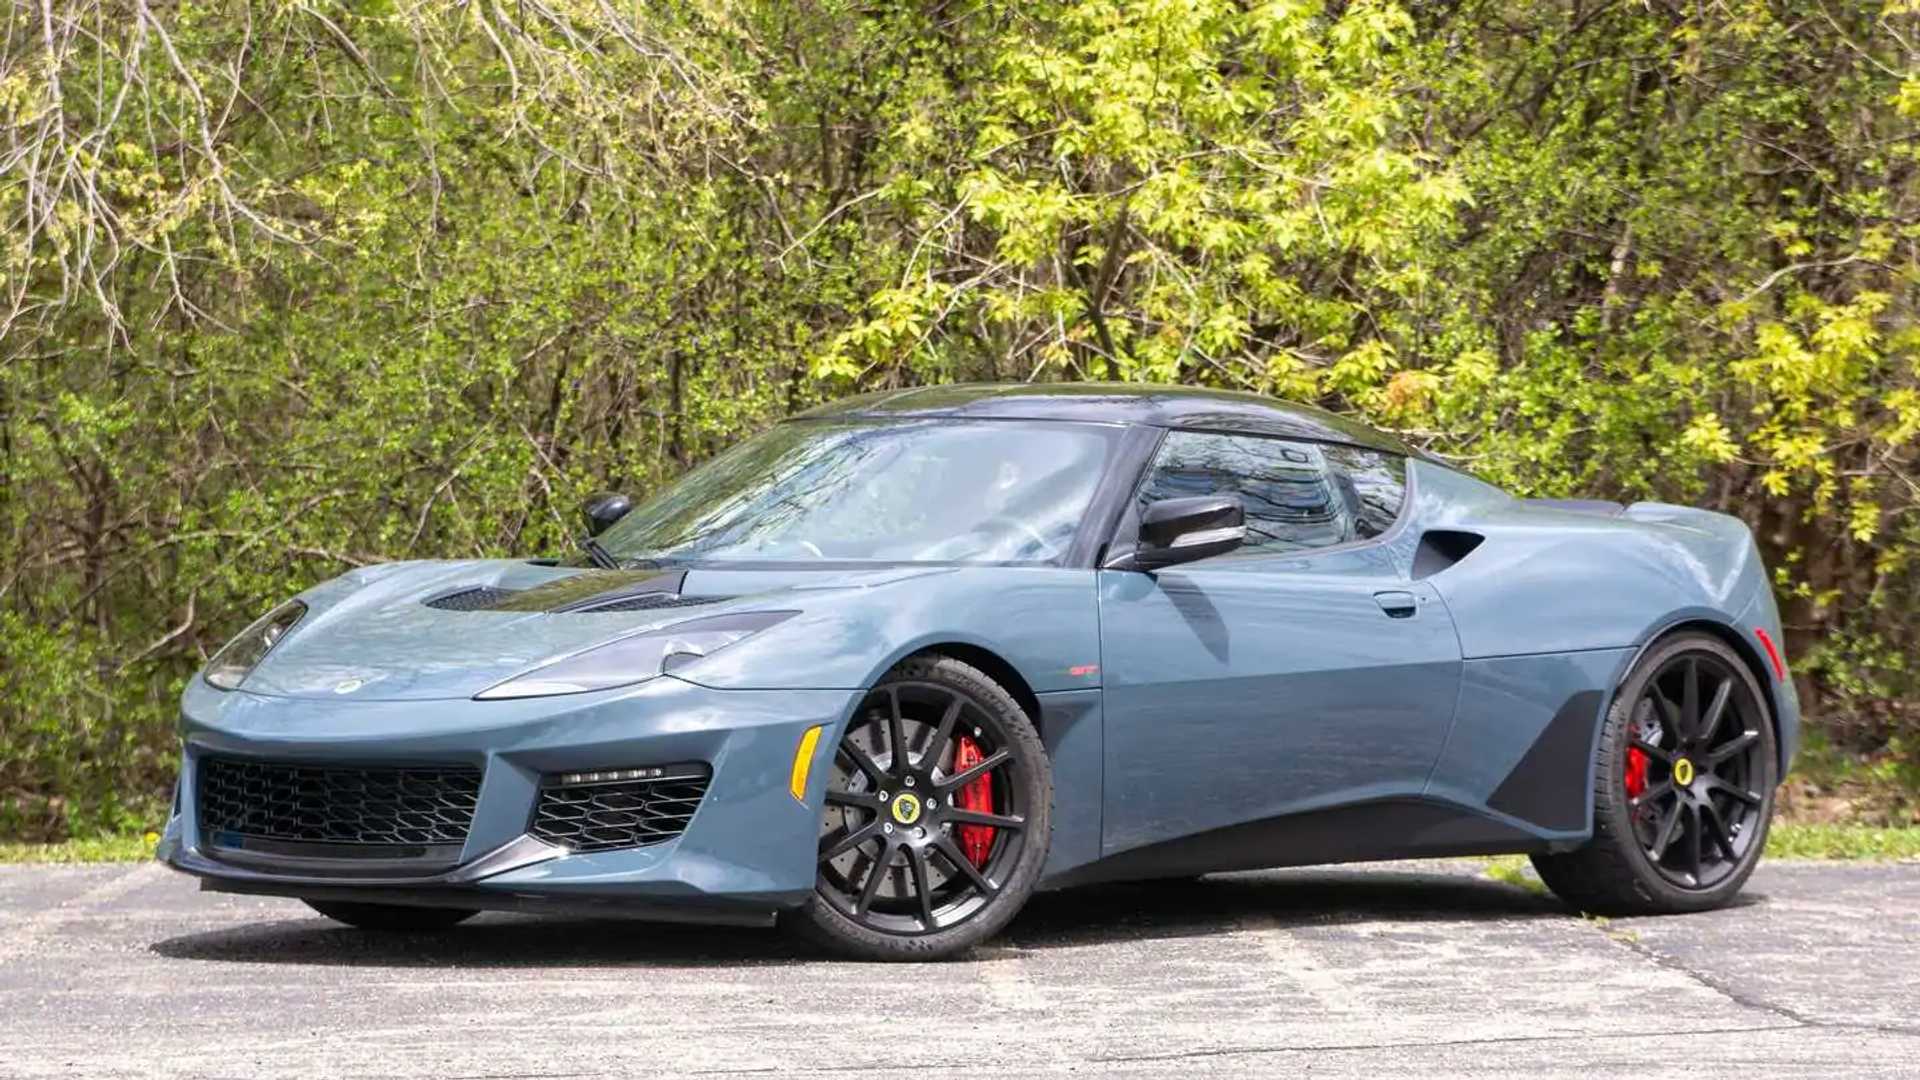 2020 Lotus Evora GT First Drive: More Cars Like This, Please